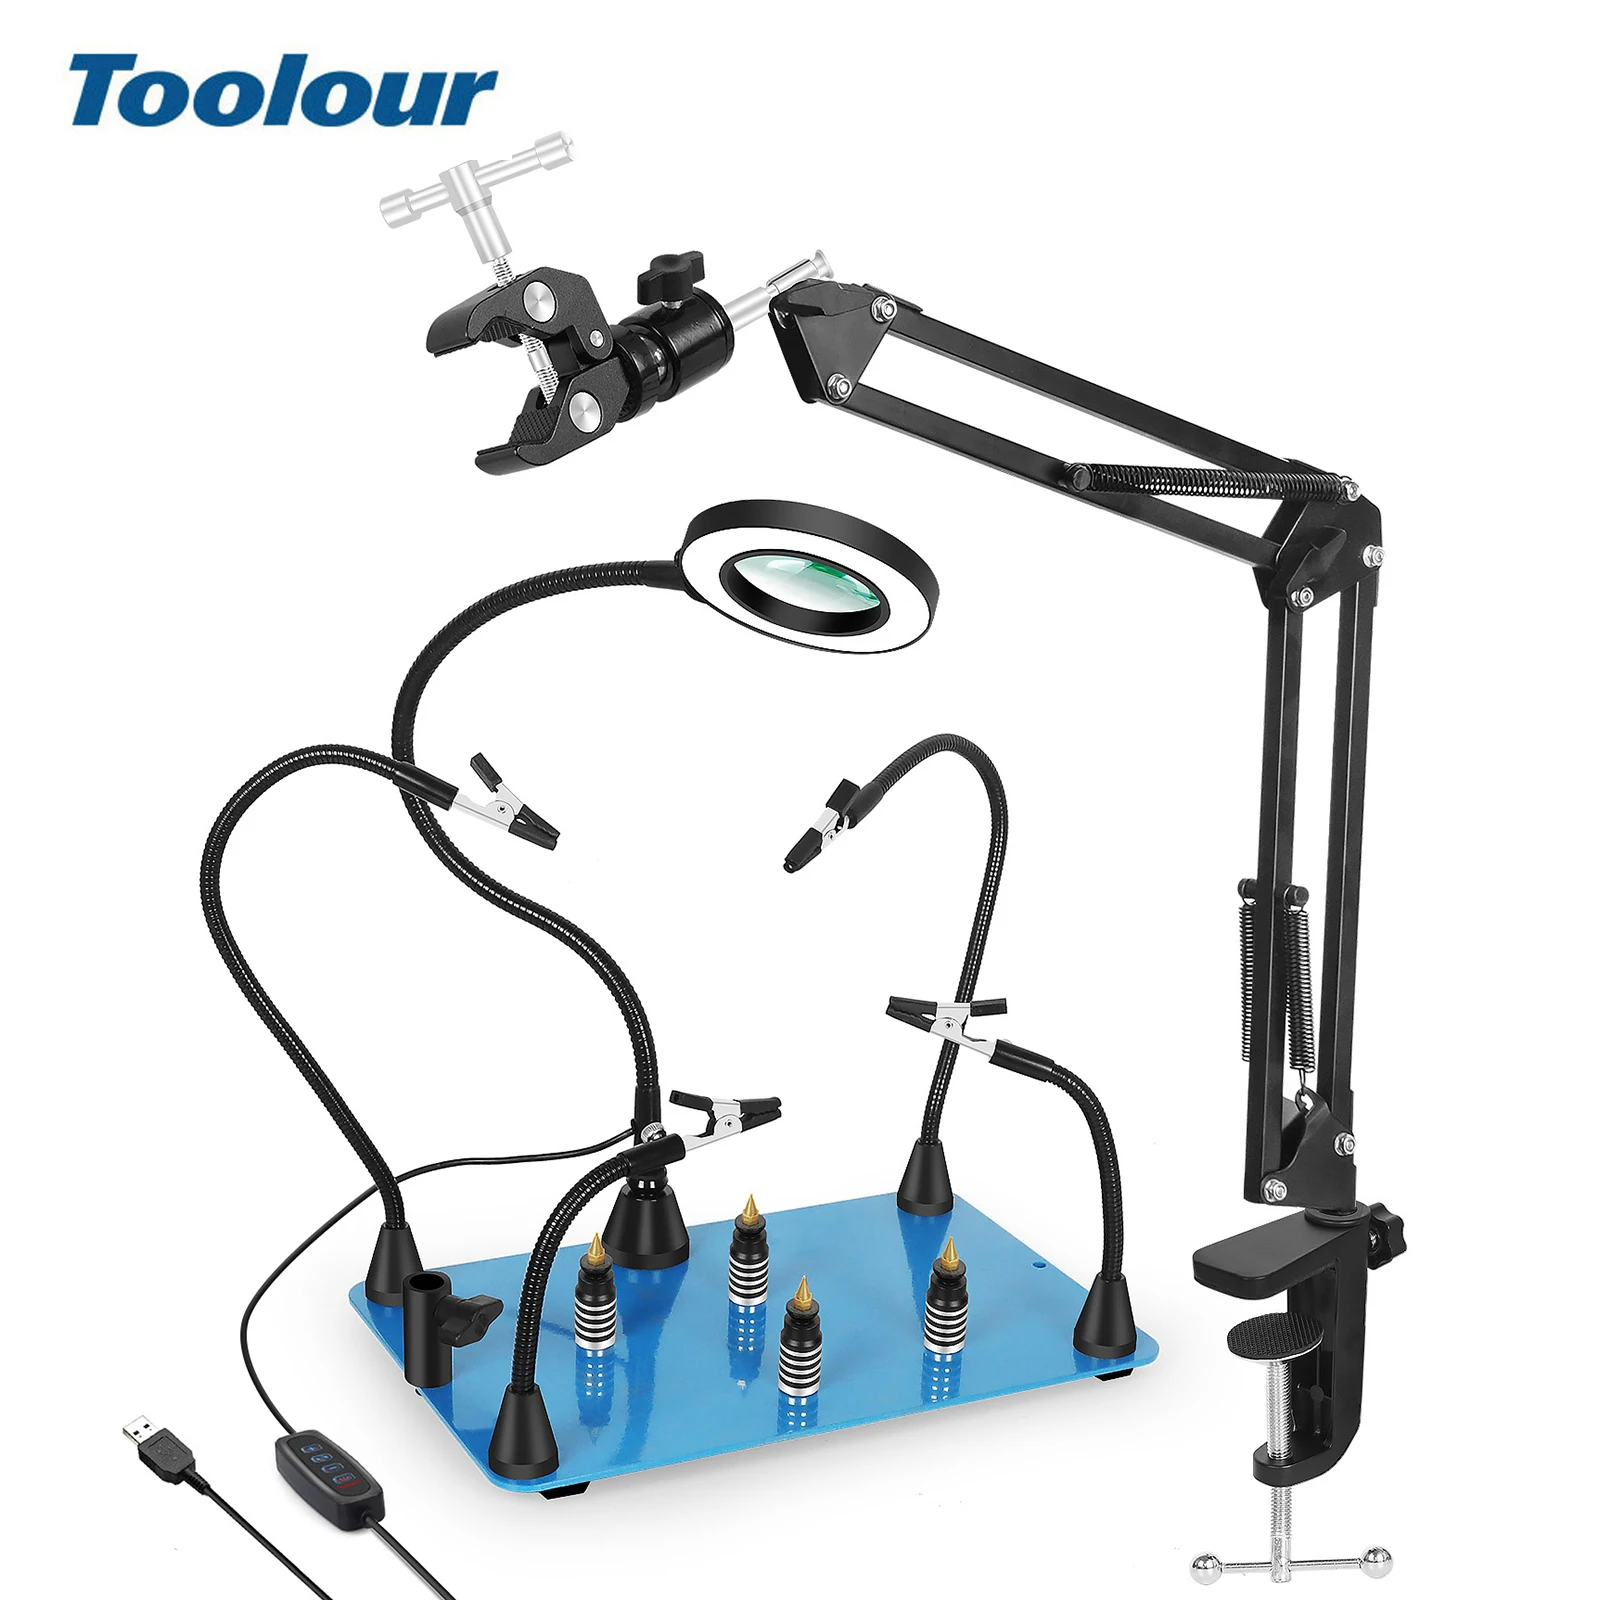 Toolour Removable Magnetic PCB Circuit Board Fixed Fixture Soldering Third Hand Welding Station Soldering Holder Repair Tools